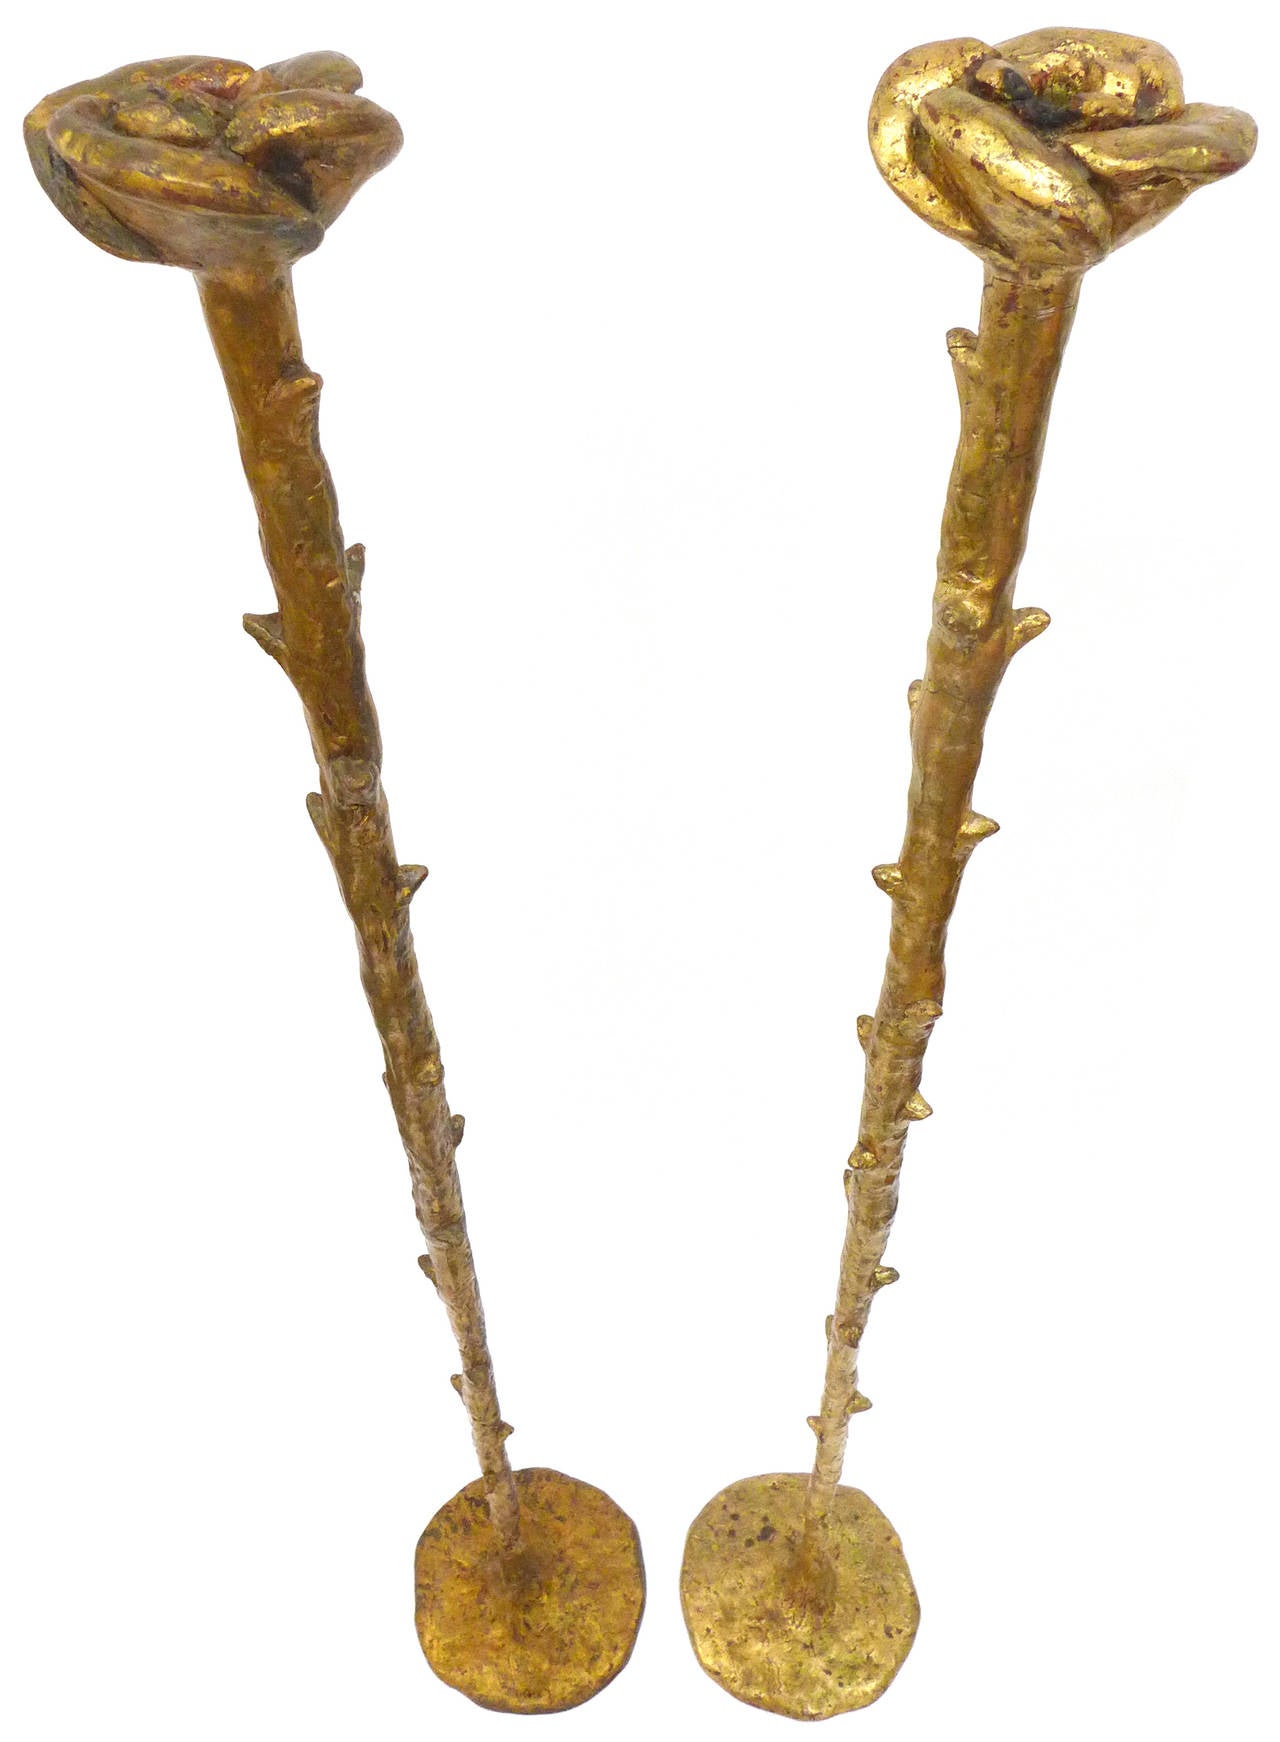 A beautiful pair of gold-leaf standing candlesticks.  Composed of cast resin, wonderfully exaggerated, Giacometti-like, stylized forms of a single rose atop a thick, throned rose-branch.  A perfect patina of subtle crazing throughout.  Great and